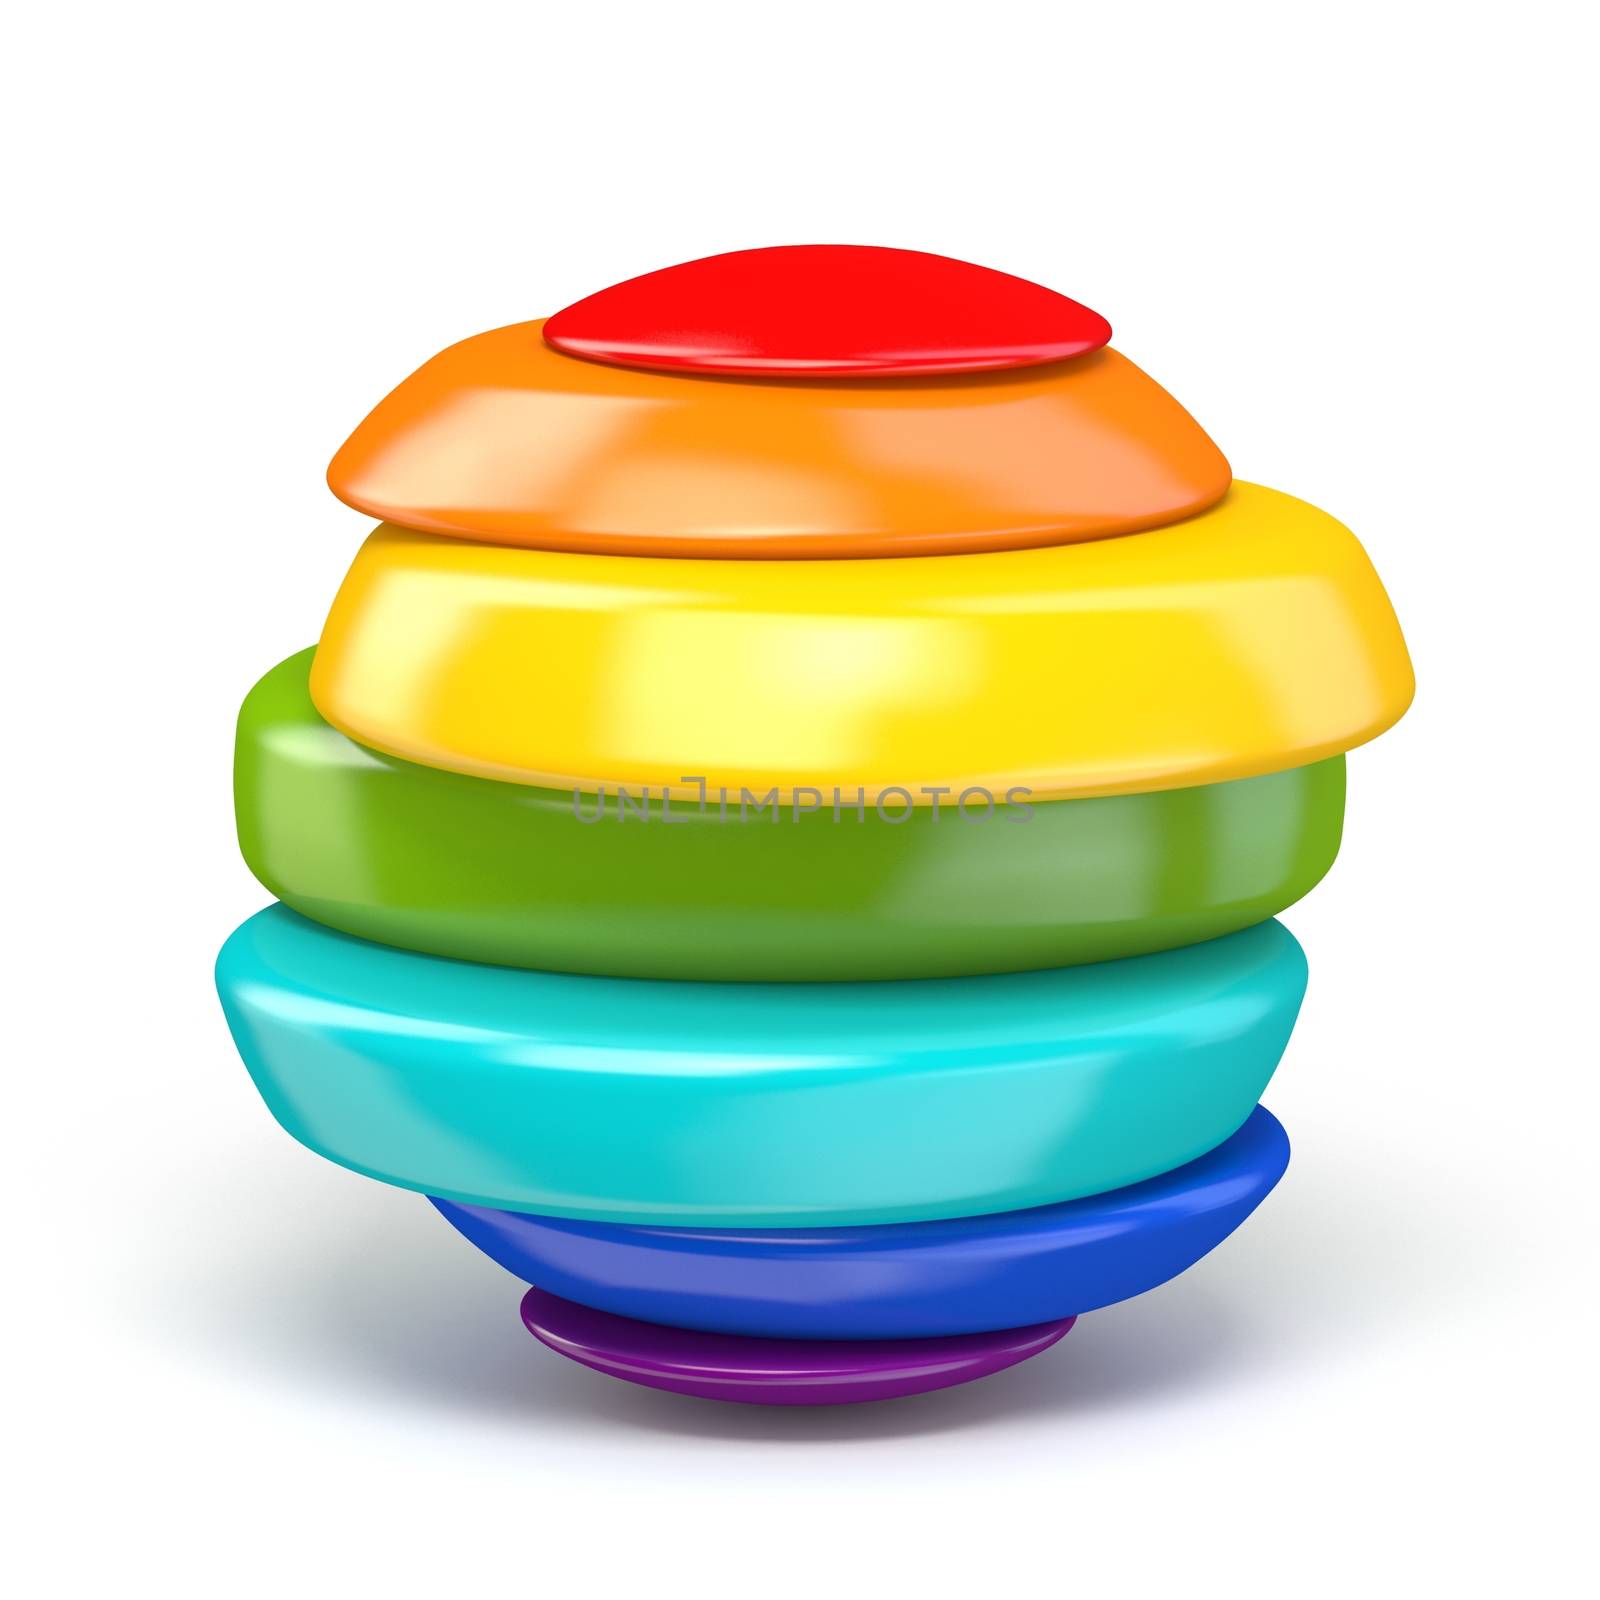 Sliced rainbow colored ball 3D by djmilic